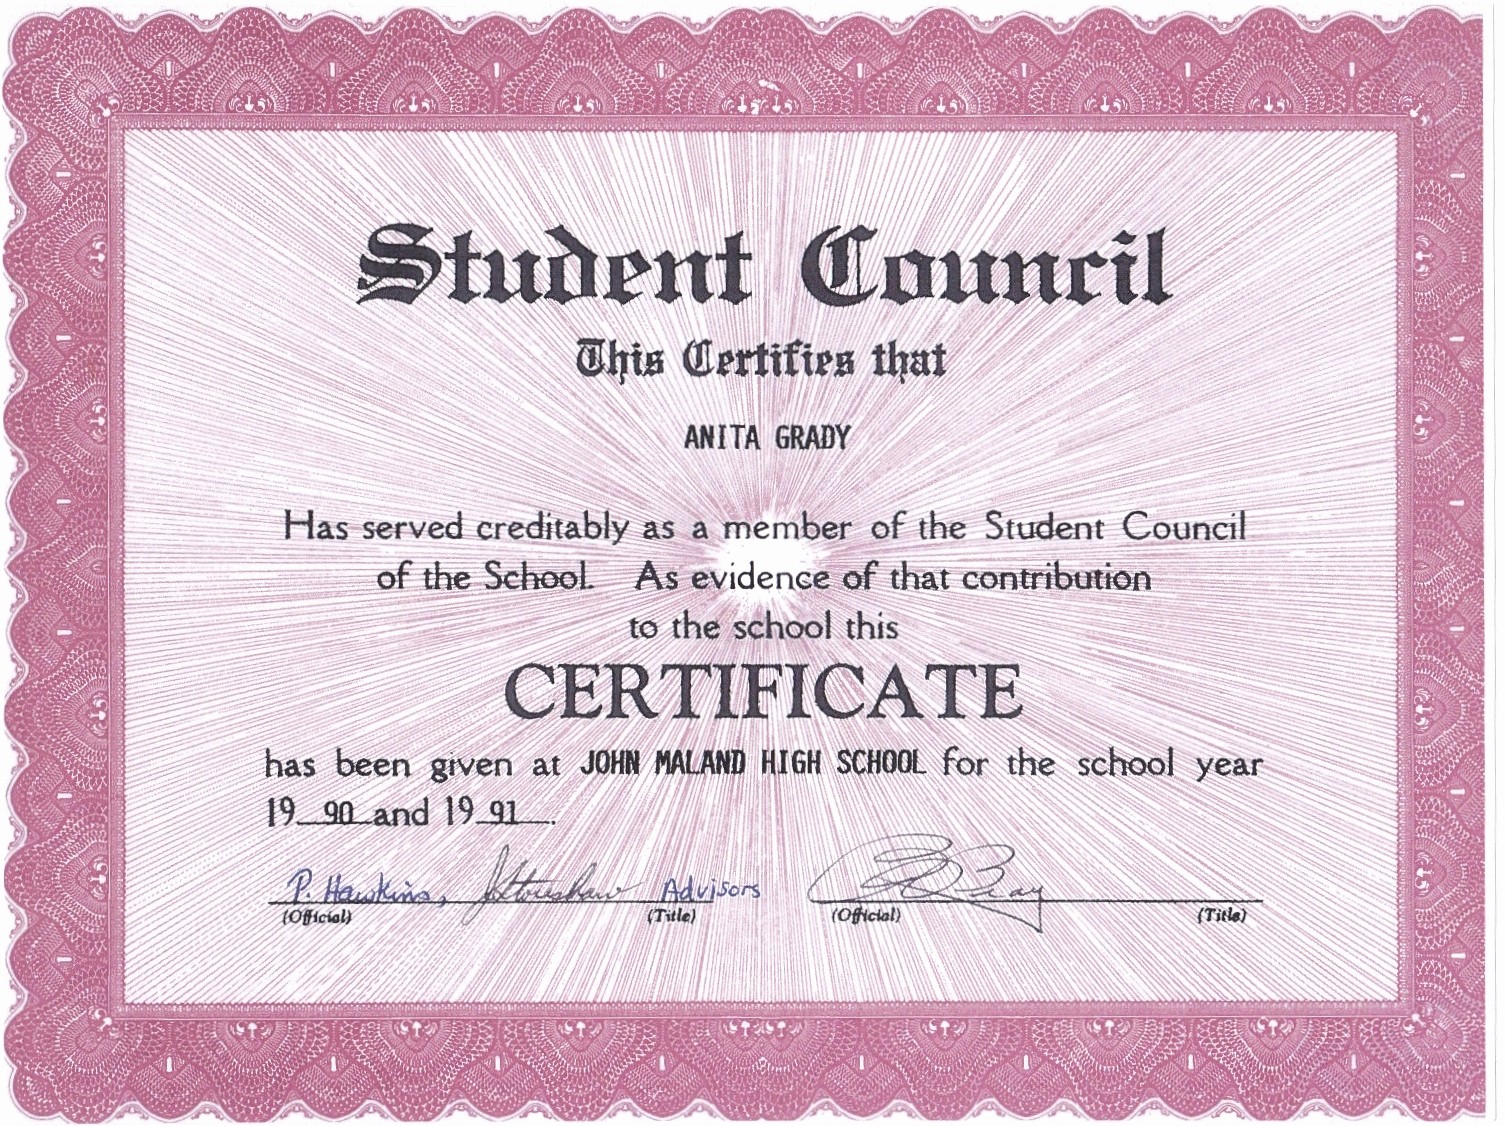 Student Council Certificate Template Free Elegant Student Council Award Certificates Christopherbathum